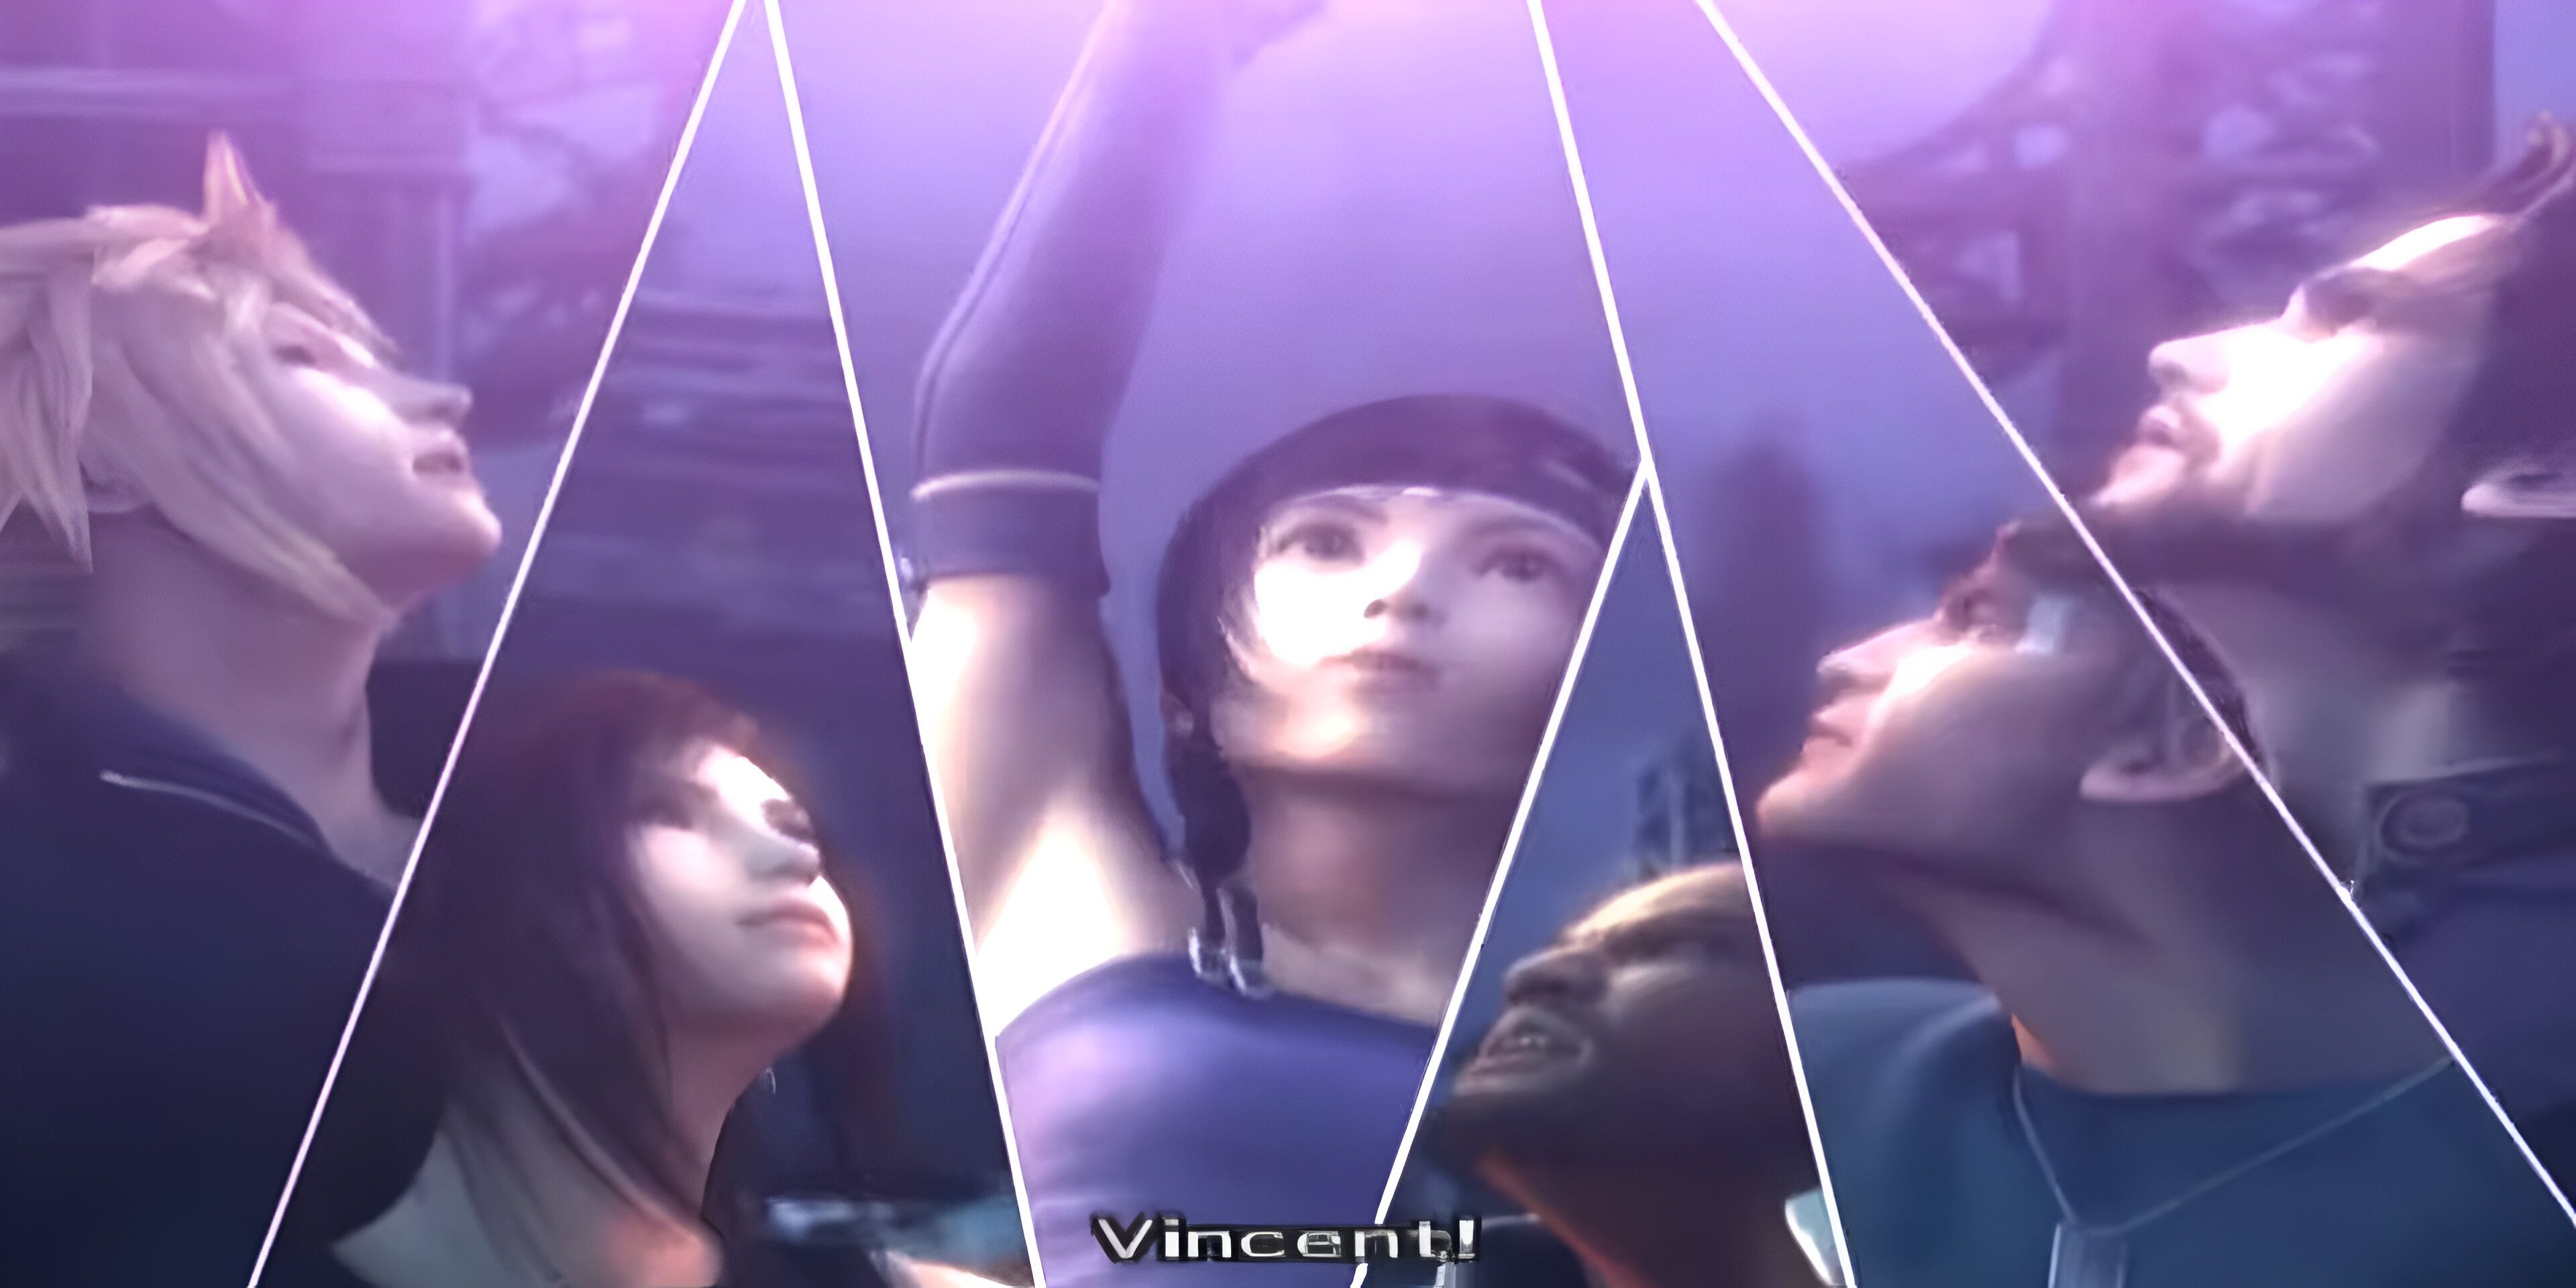 Yuffie and the gang empower Vincent in Dirge Of Cerberus Final Fantasy 7